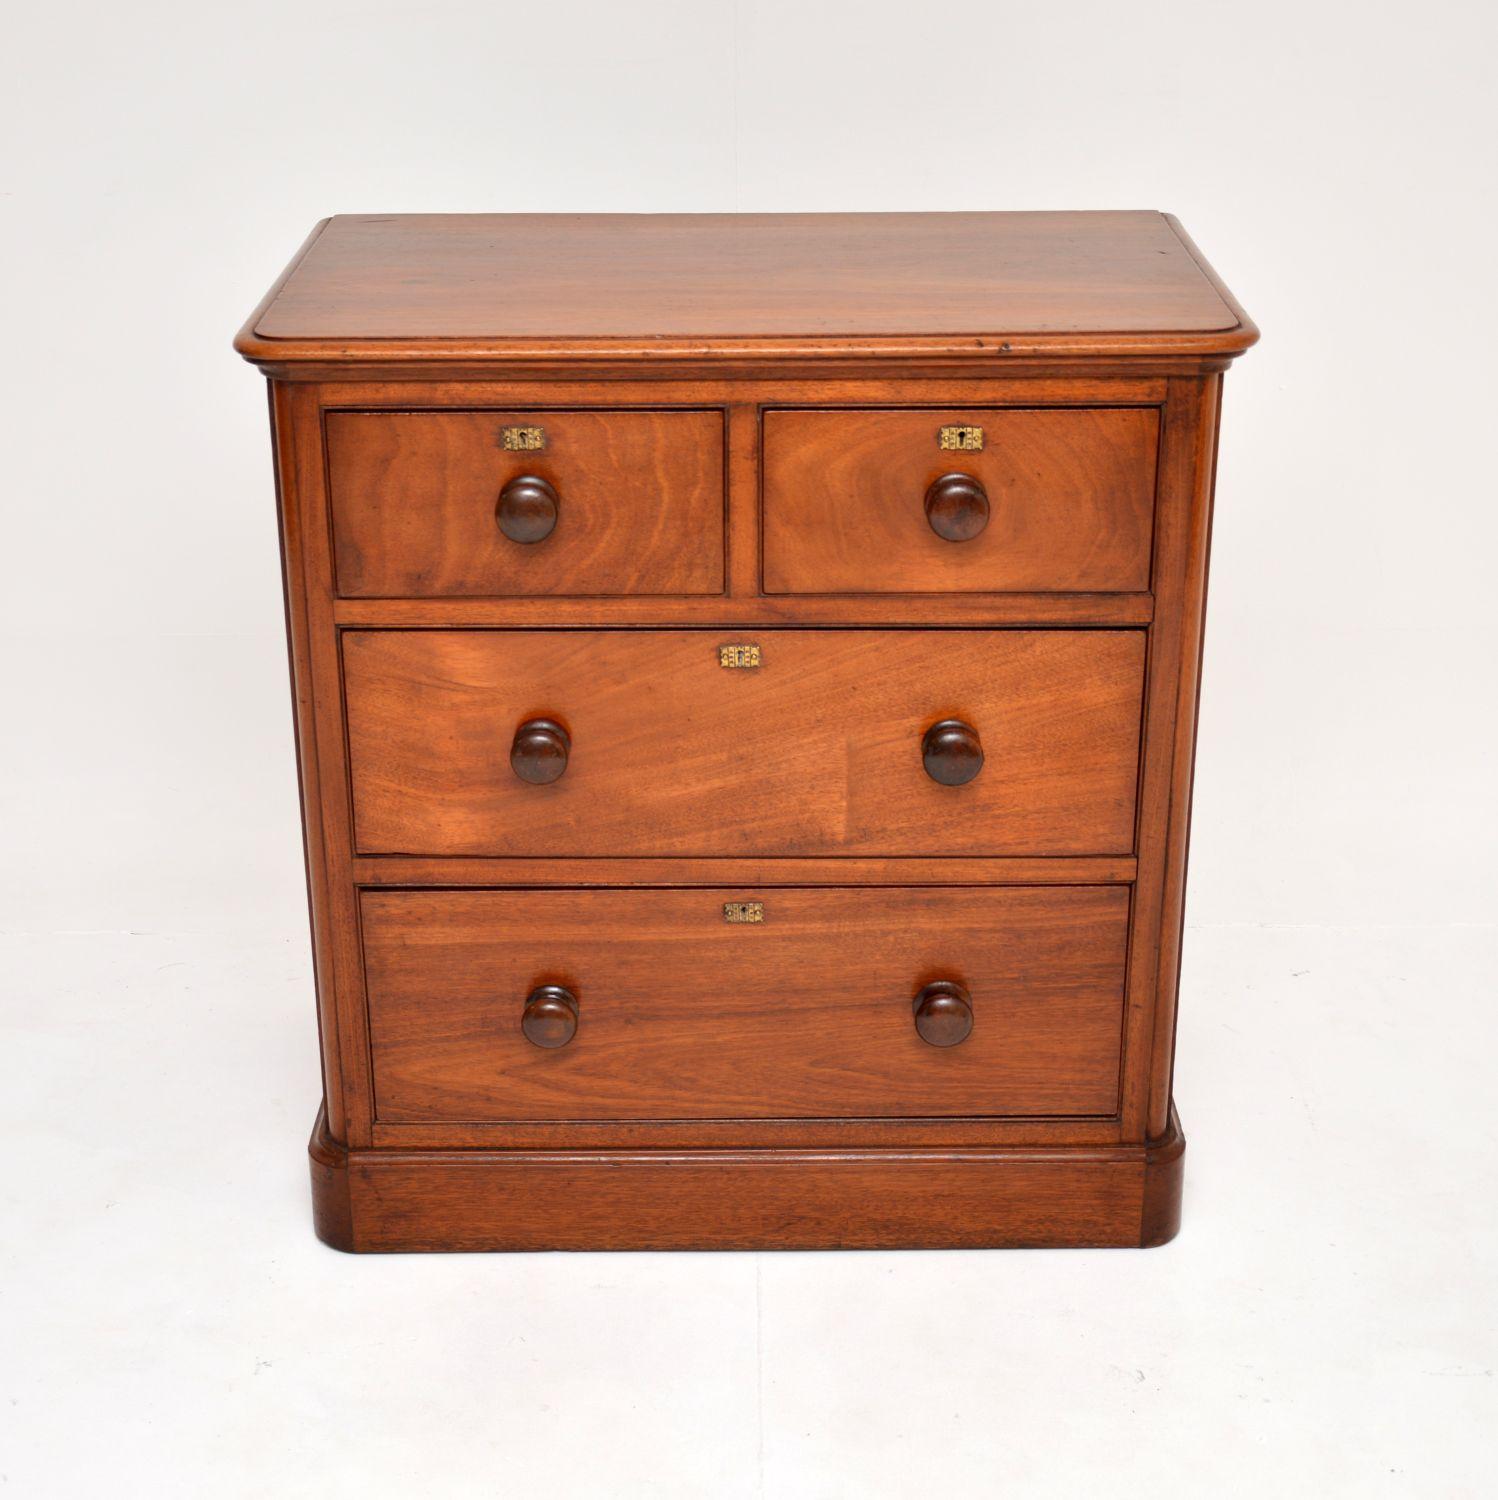 A gorgeous antique Victorian chest of drawers of small proportions. This was made in England, it dates from around the 1860-1880 period.

It is of superb quality and is a very useful, low size. There are four generous and deep drawers with